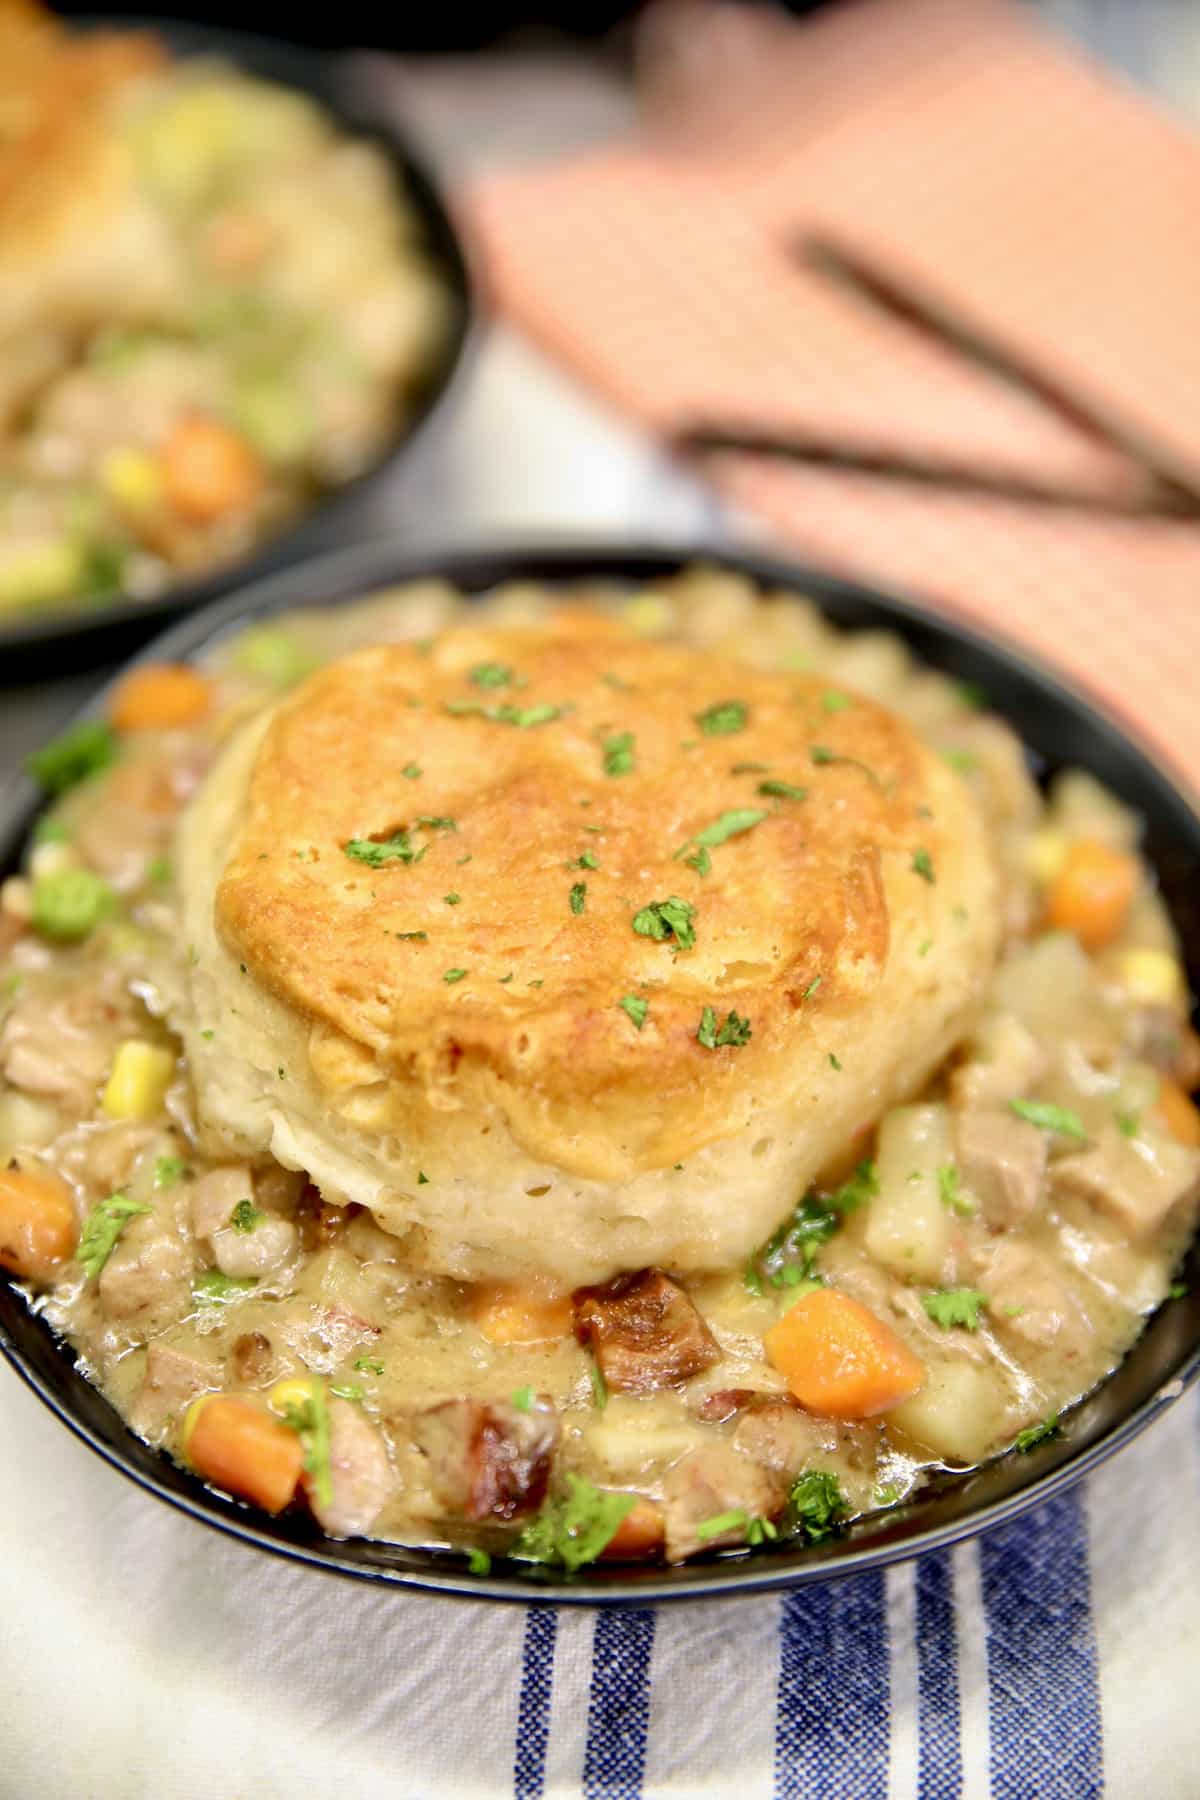 Brisket pot pie with biscuits in a bowl.